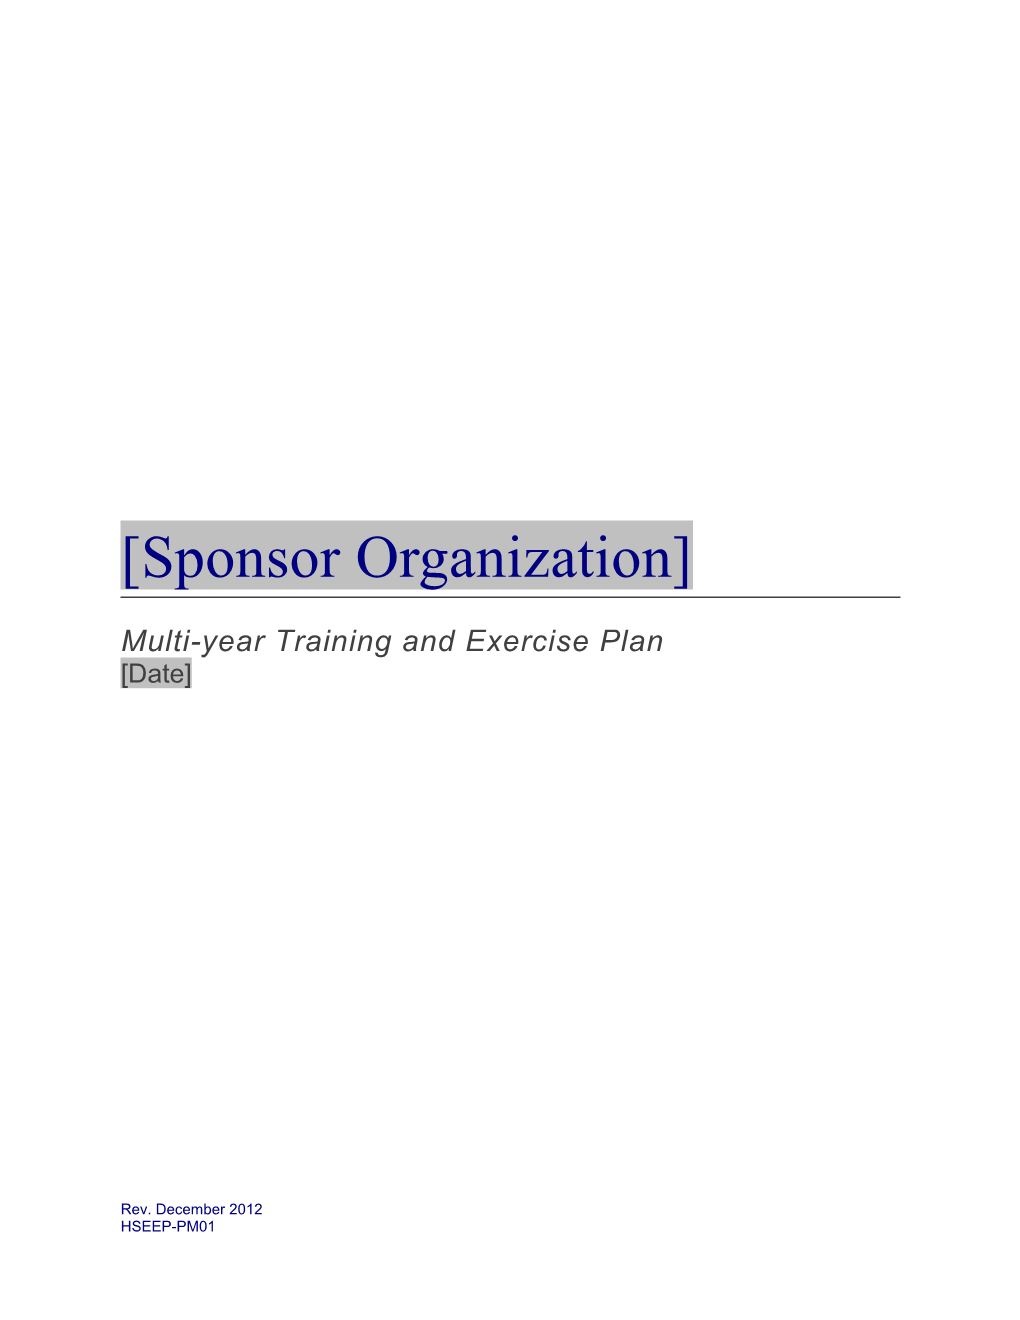 Training and Exercise Plan Template Dec-12